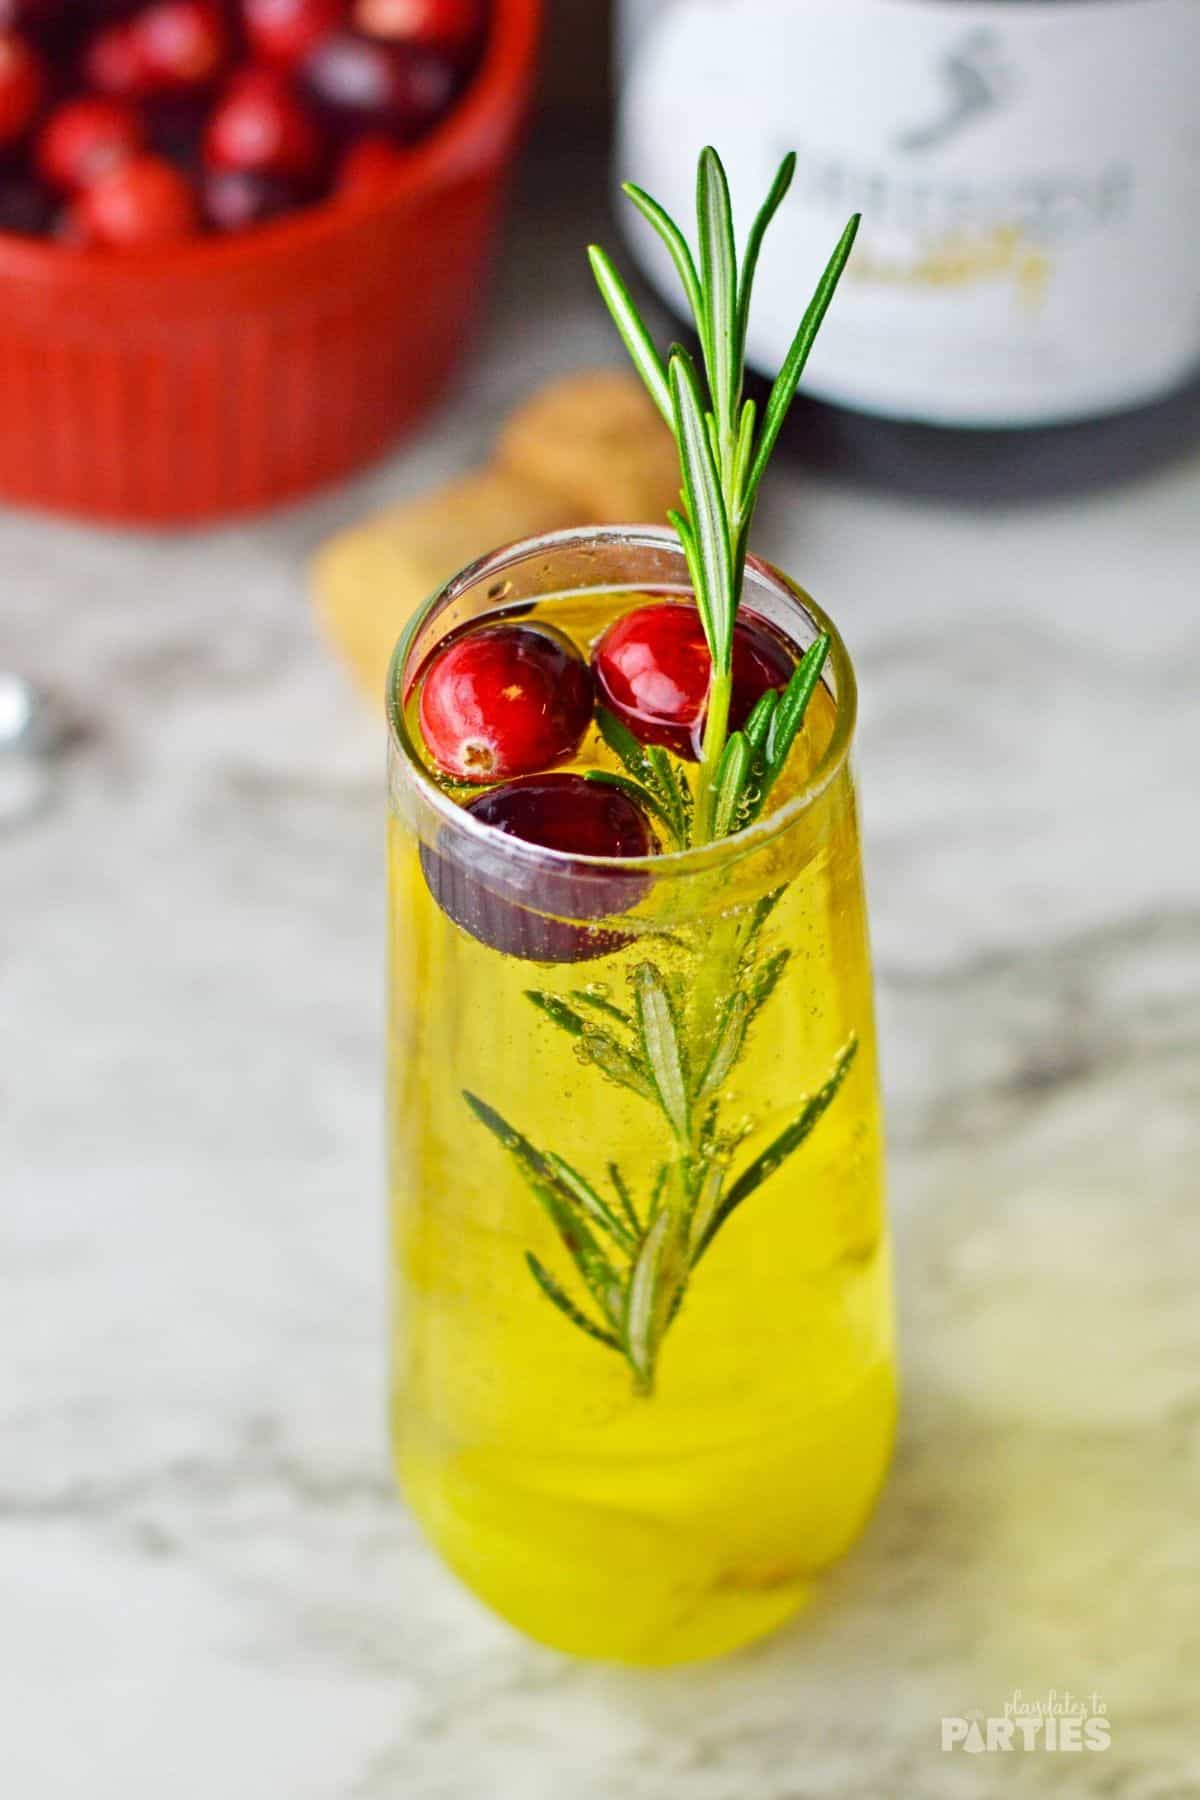 A champagne flute filled with a mimosa mixture, cranberries, and rosemary.